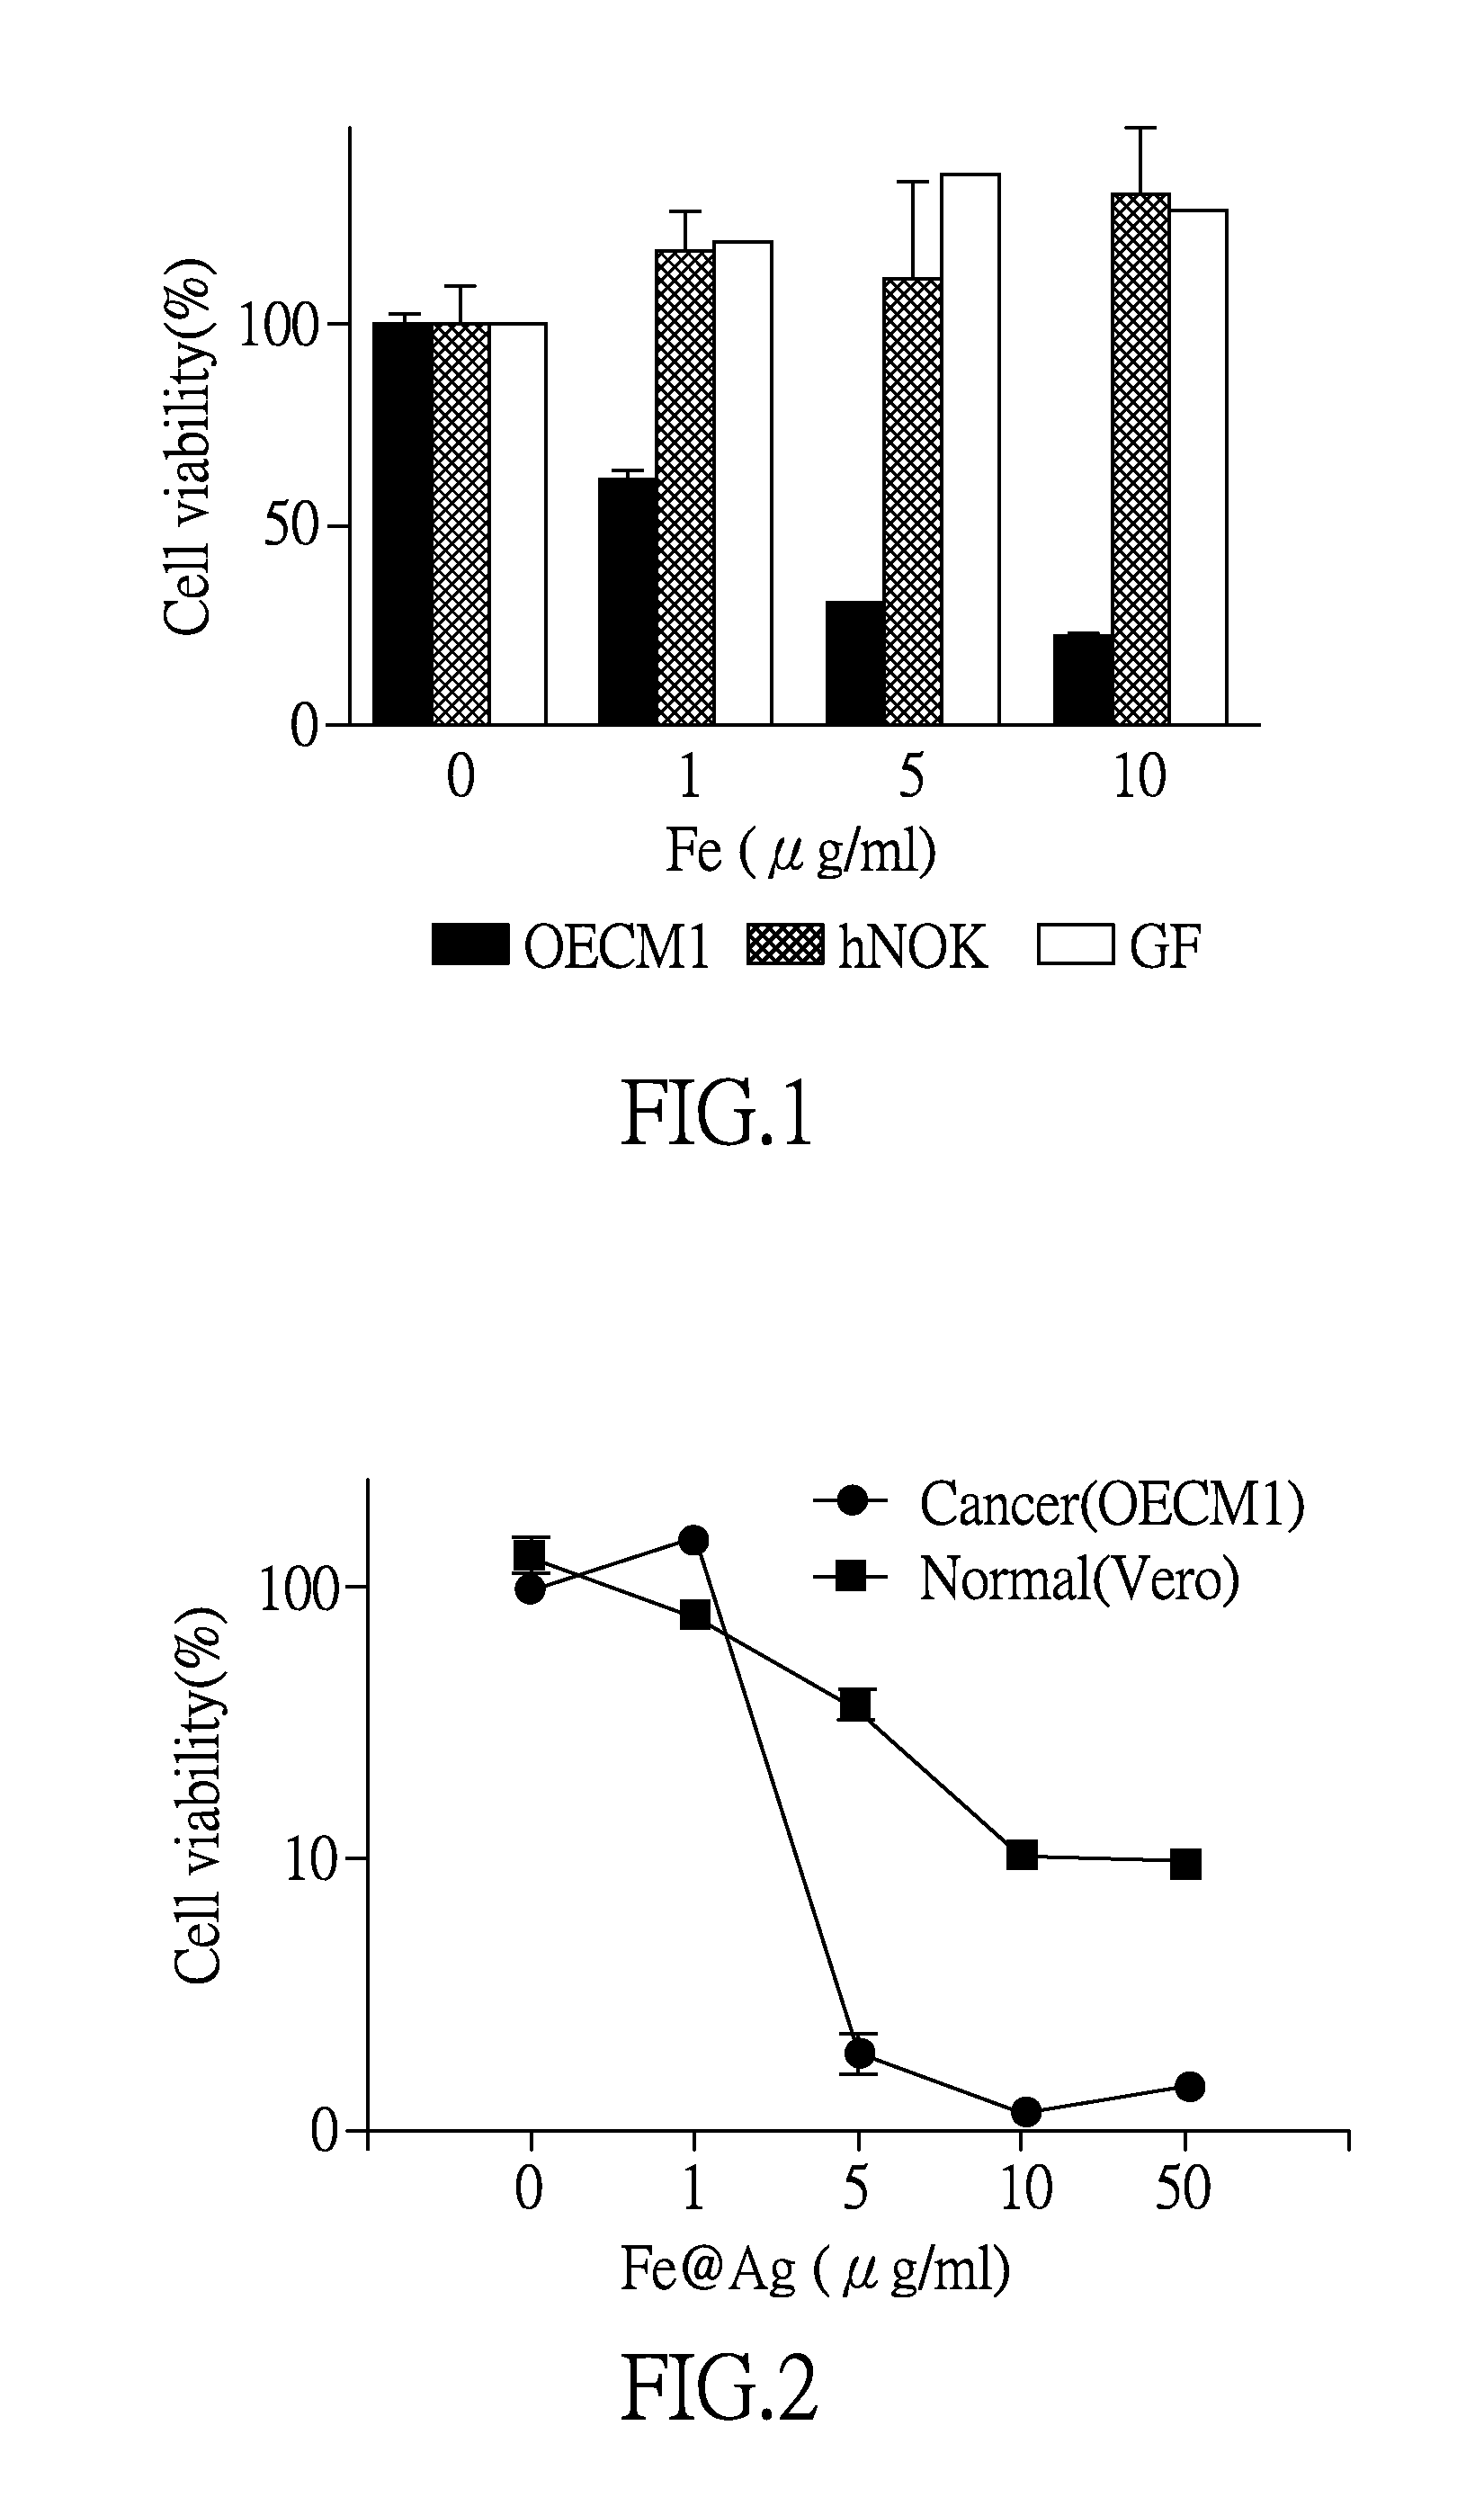 Method for treating cancer by using Fe-based particles